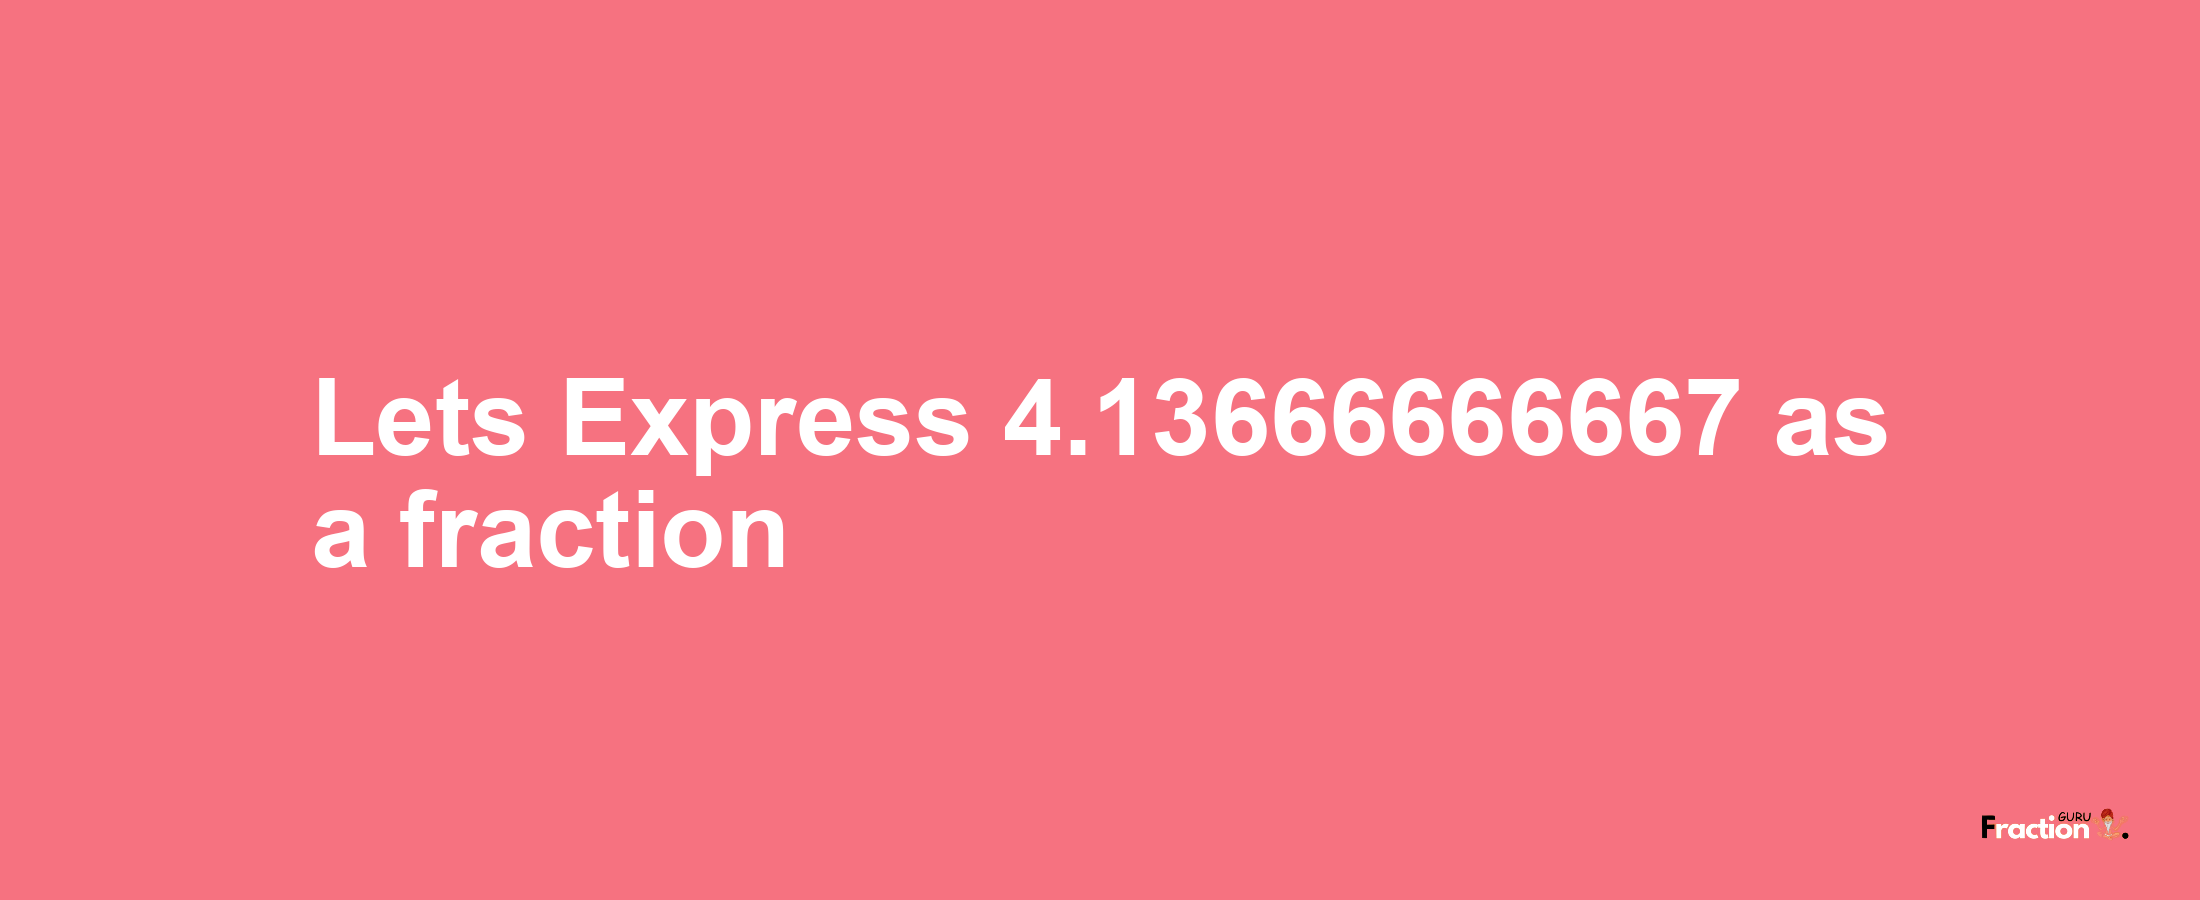 Lets Express 4.13666666667 as afraction